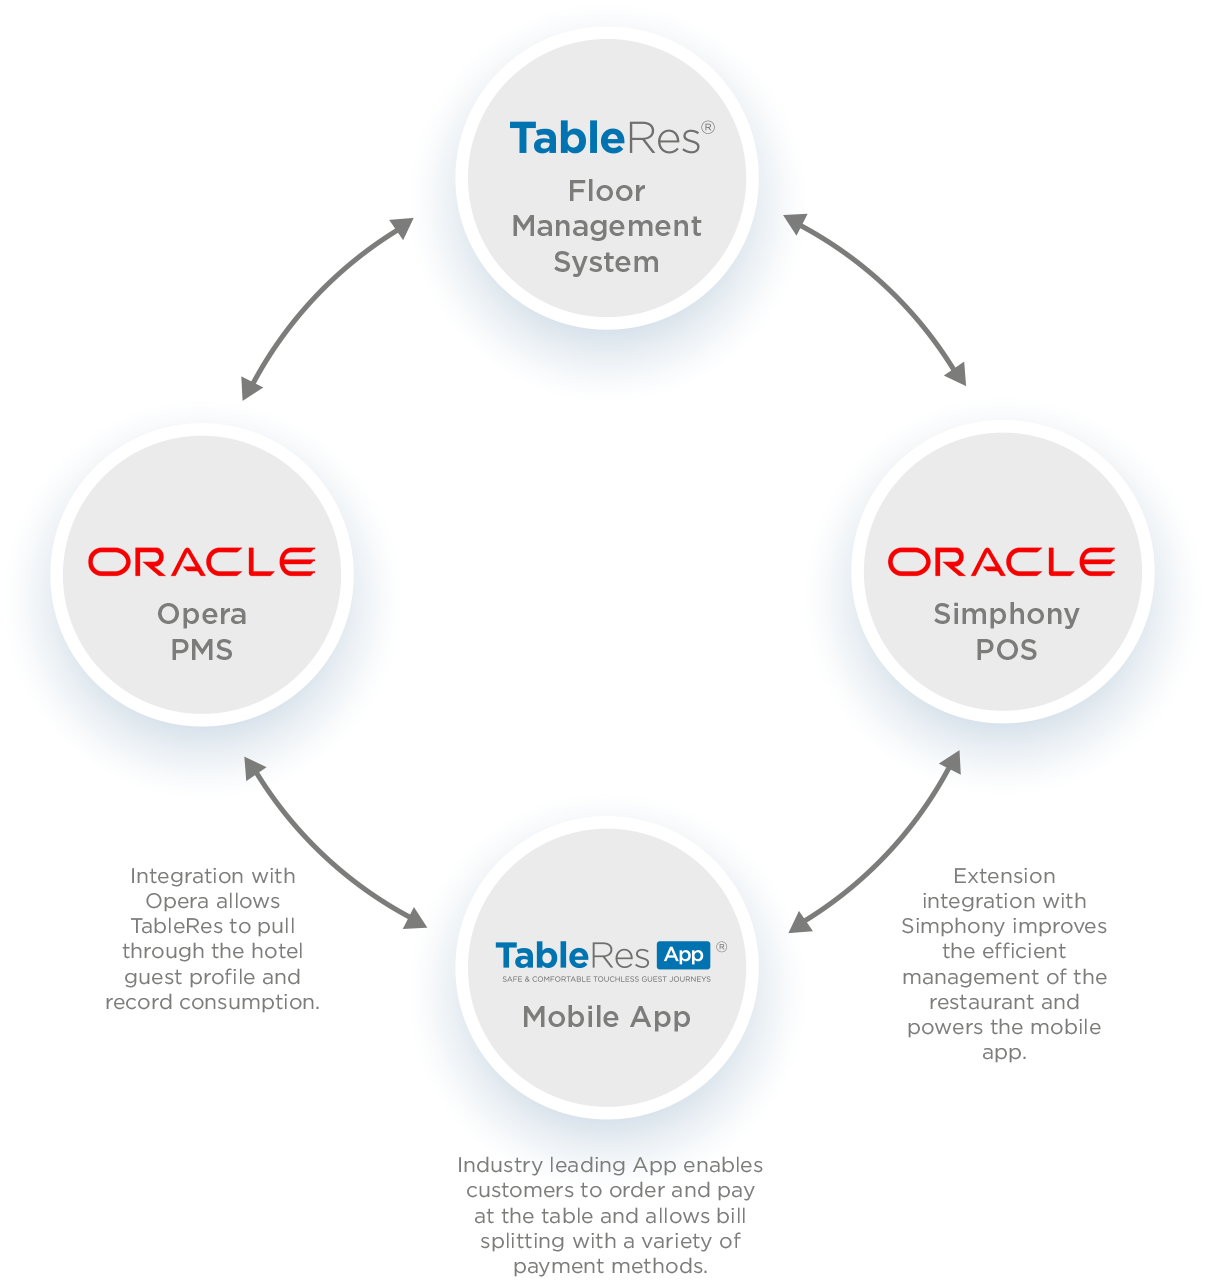 TableRes Integration with Oracle Simphony POS and Opera PMS